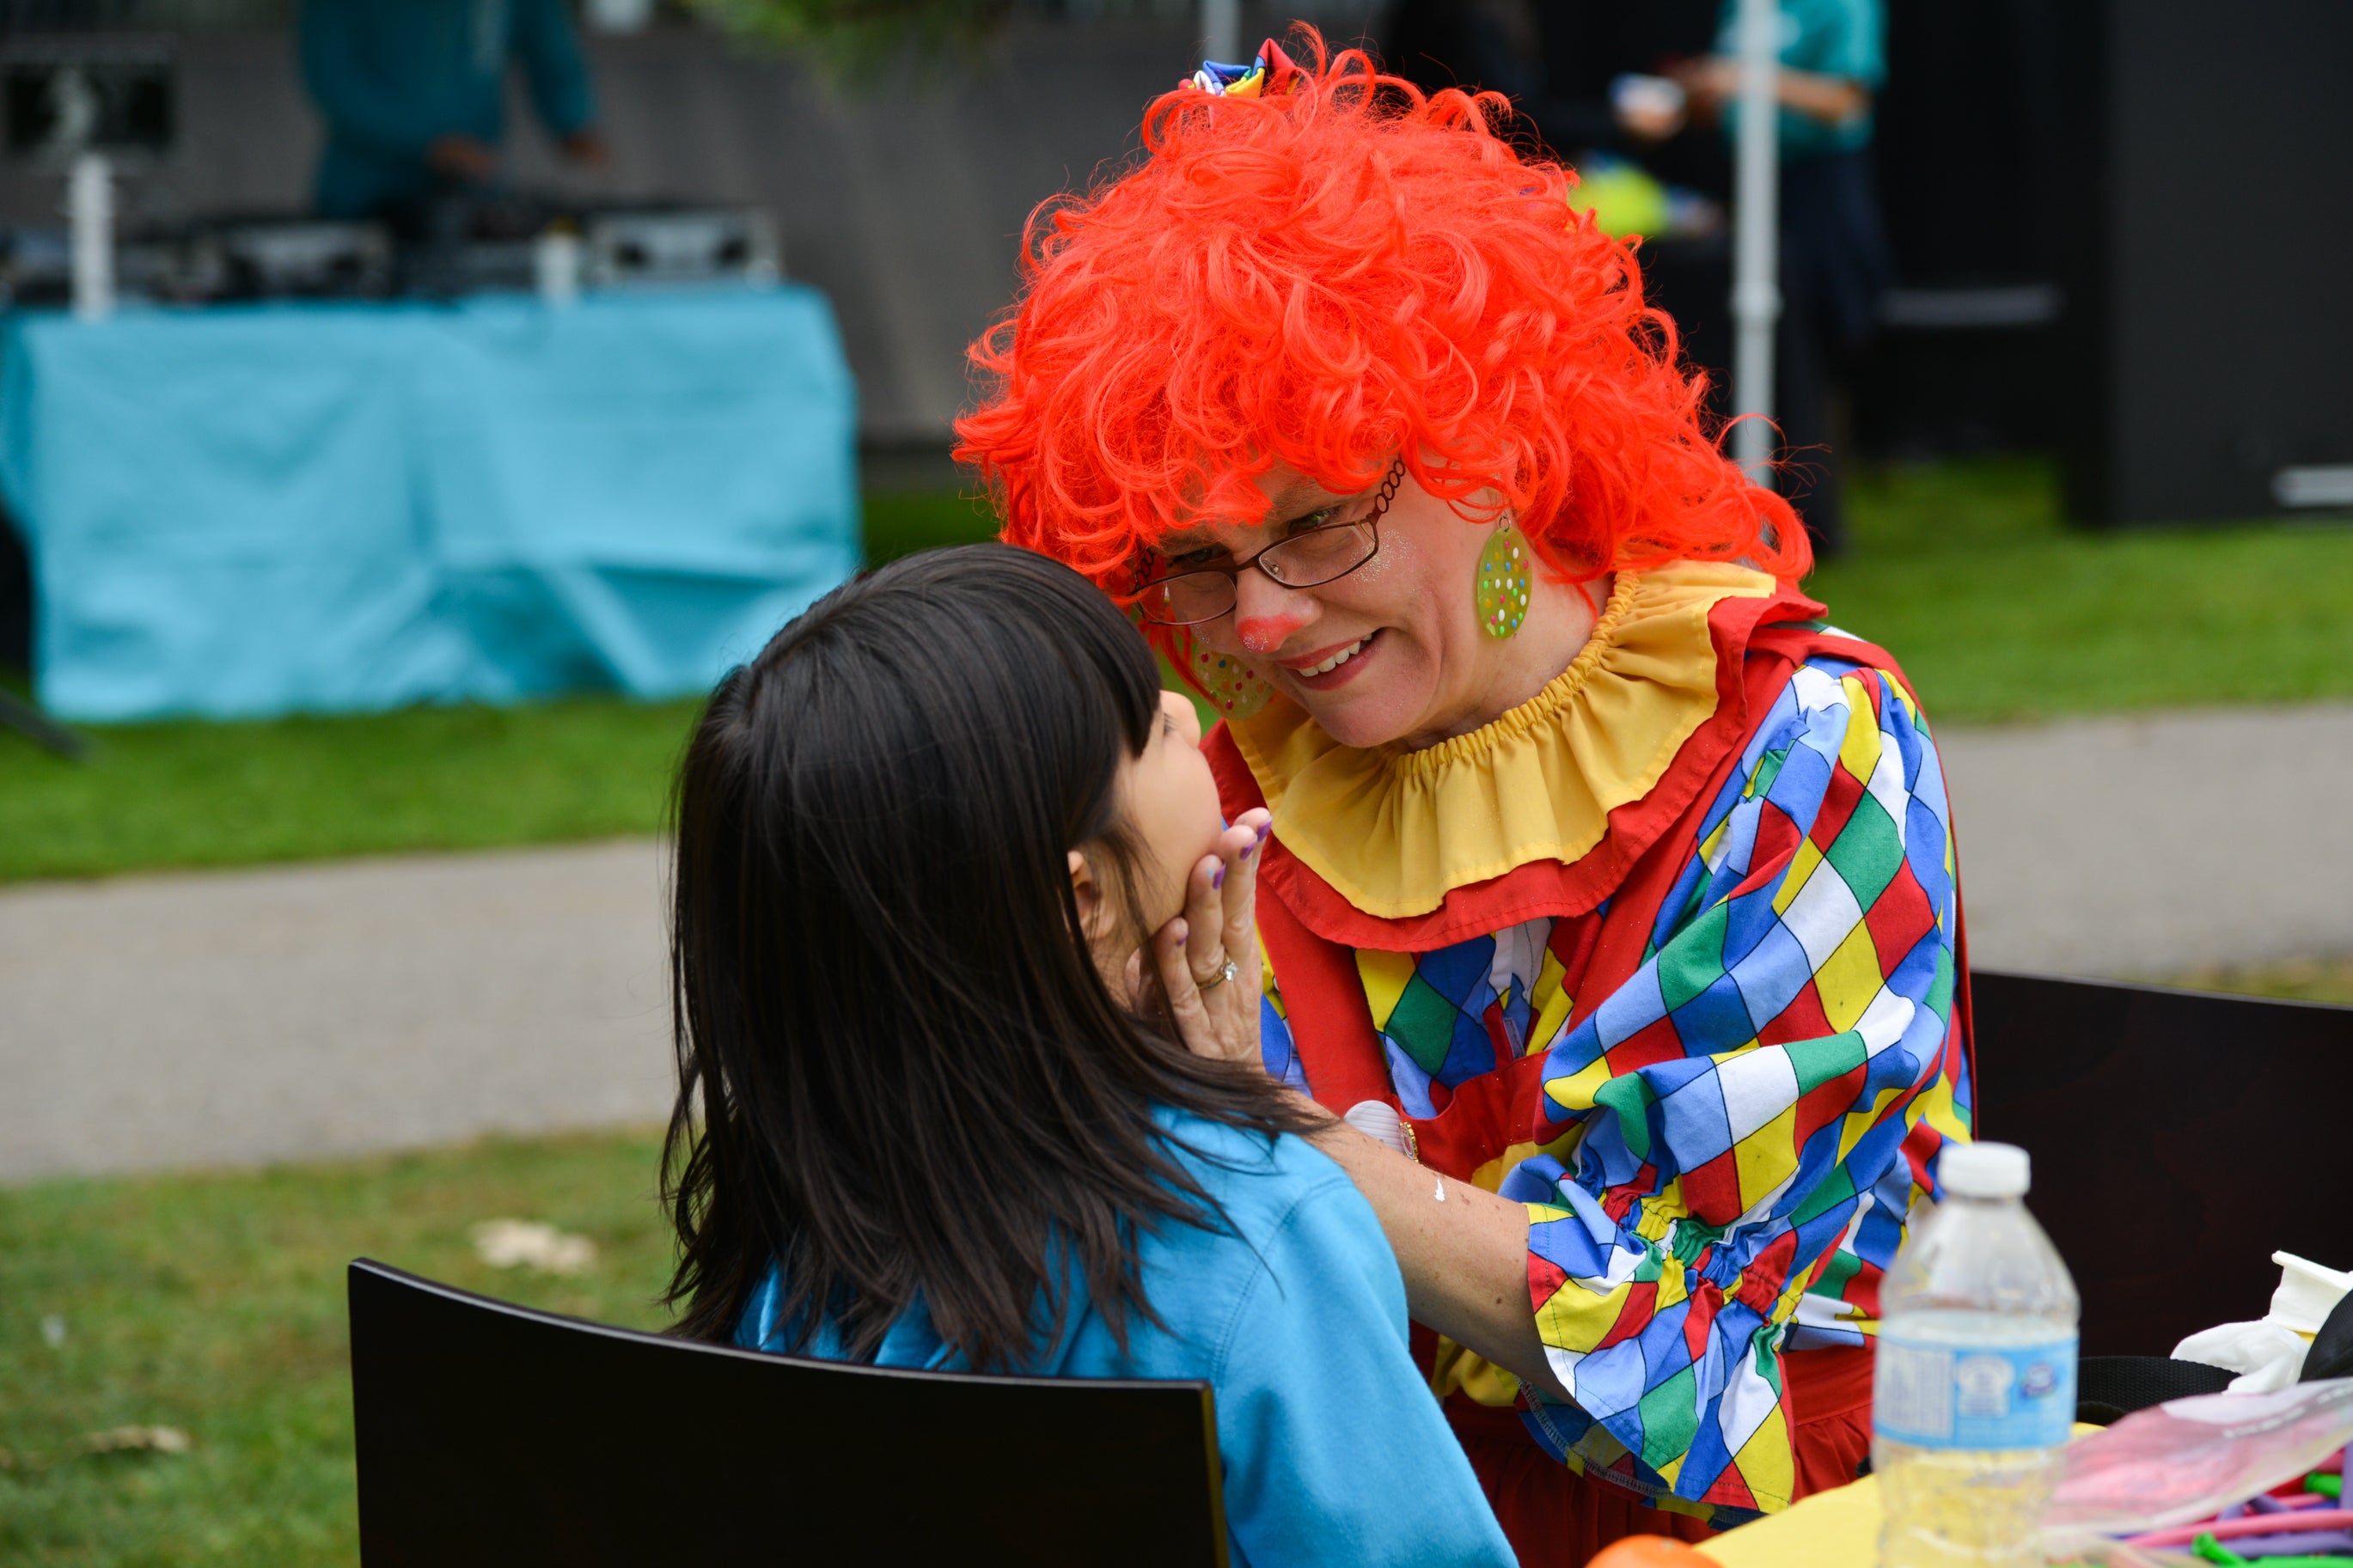 A girl getting her face painted by a woman in a clown suit.